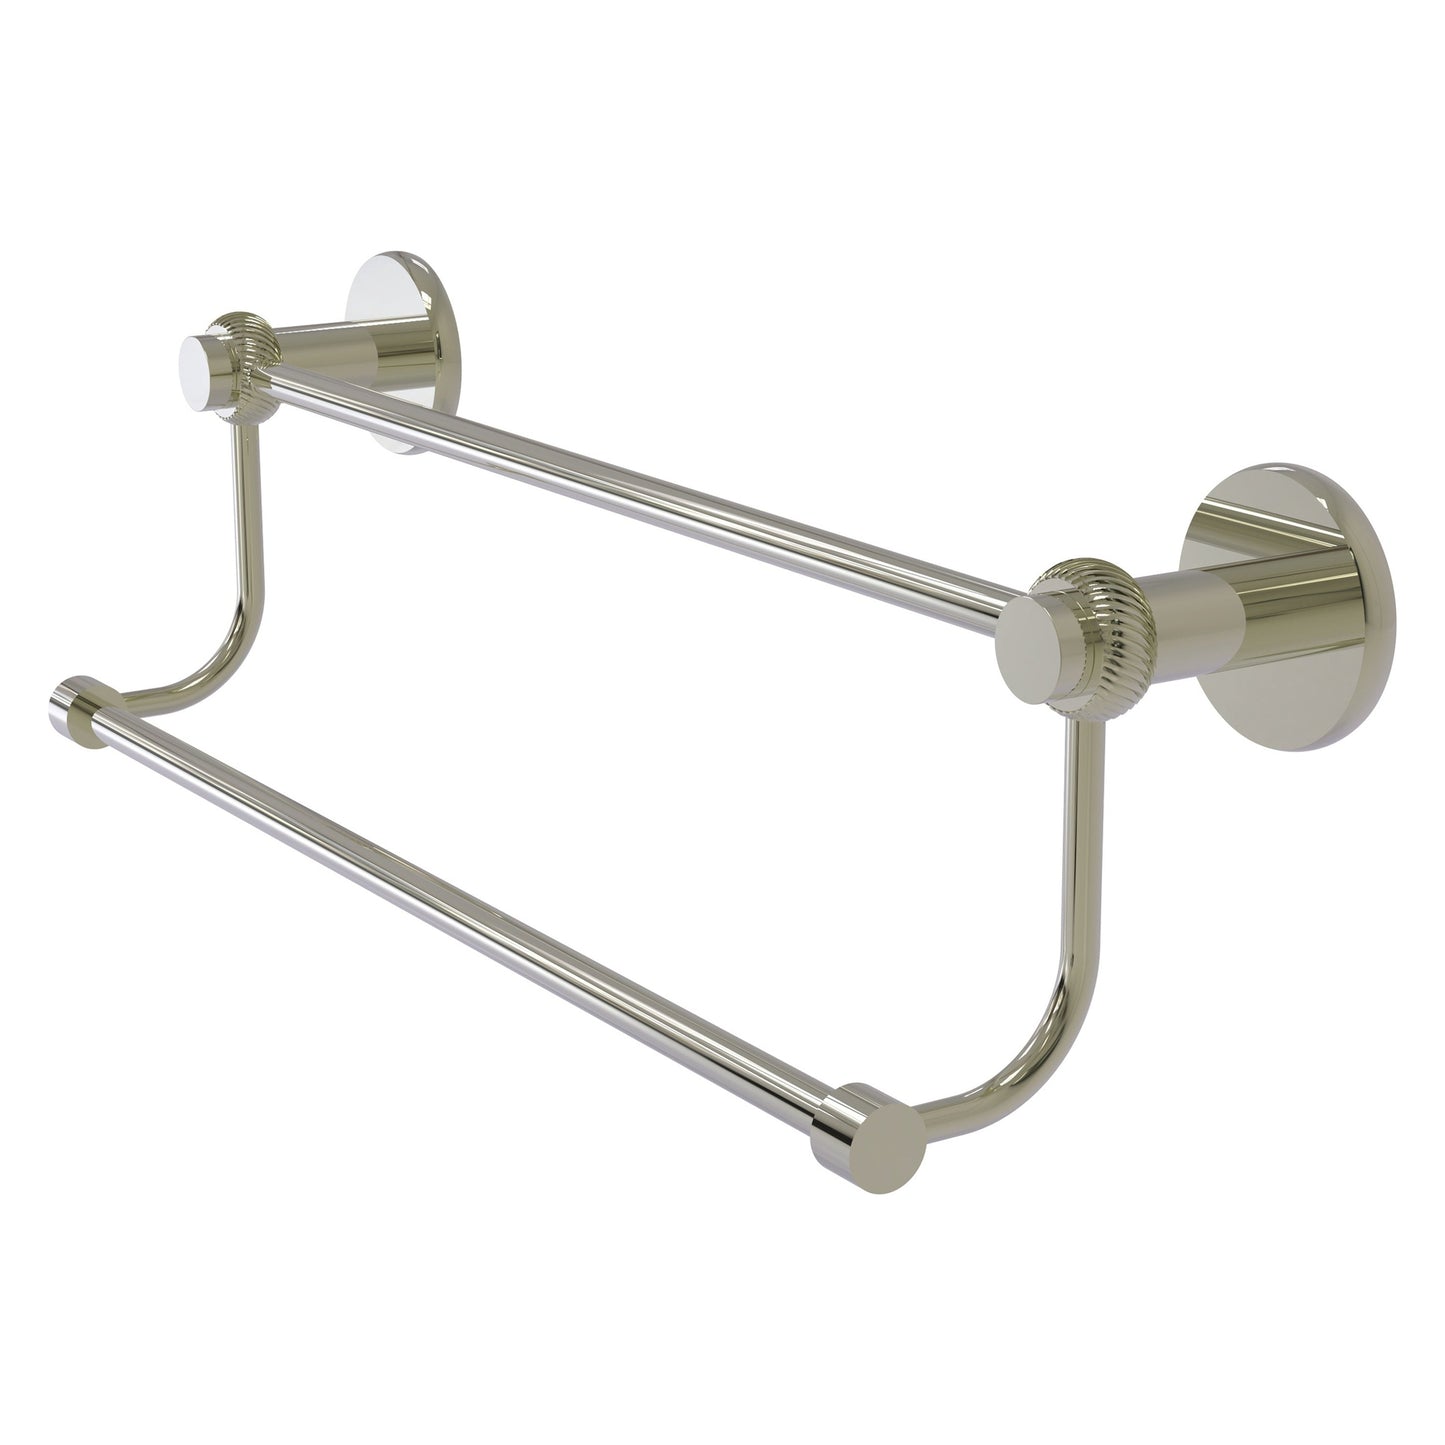 Allied Brass Mercury 18" x 20.5" Polished Nickel Solid Brass Double Towel Bar With Twist Accents